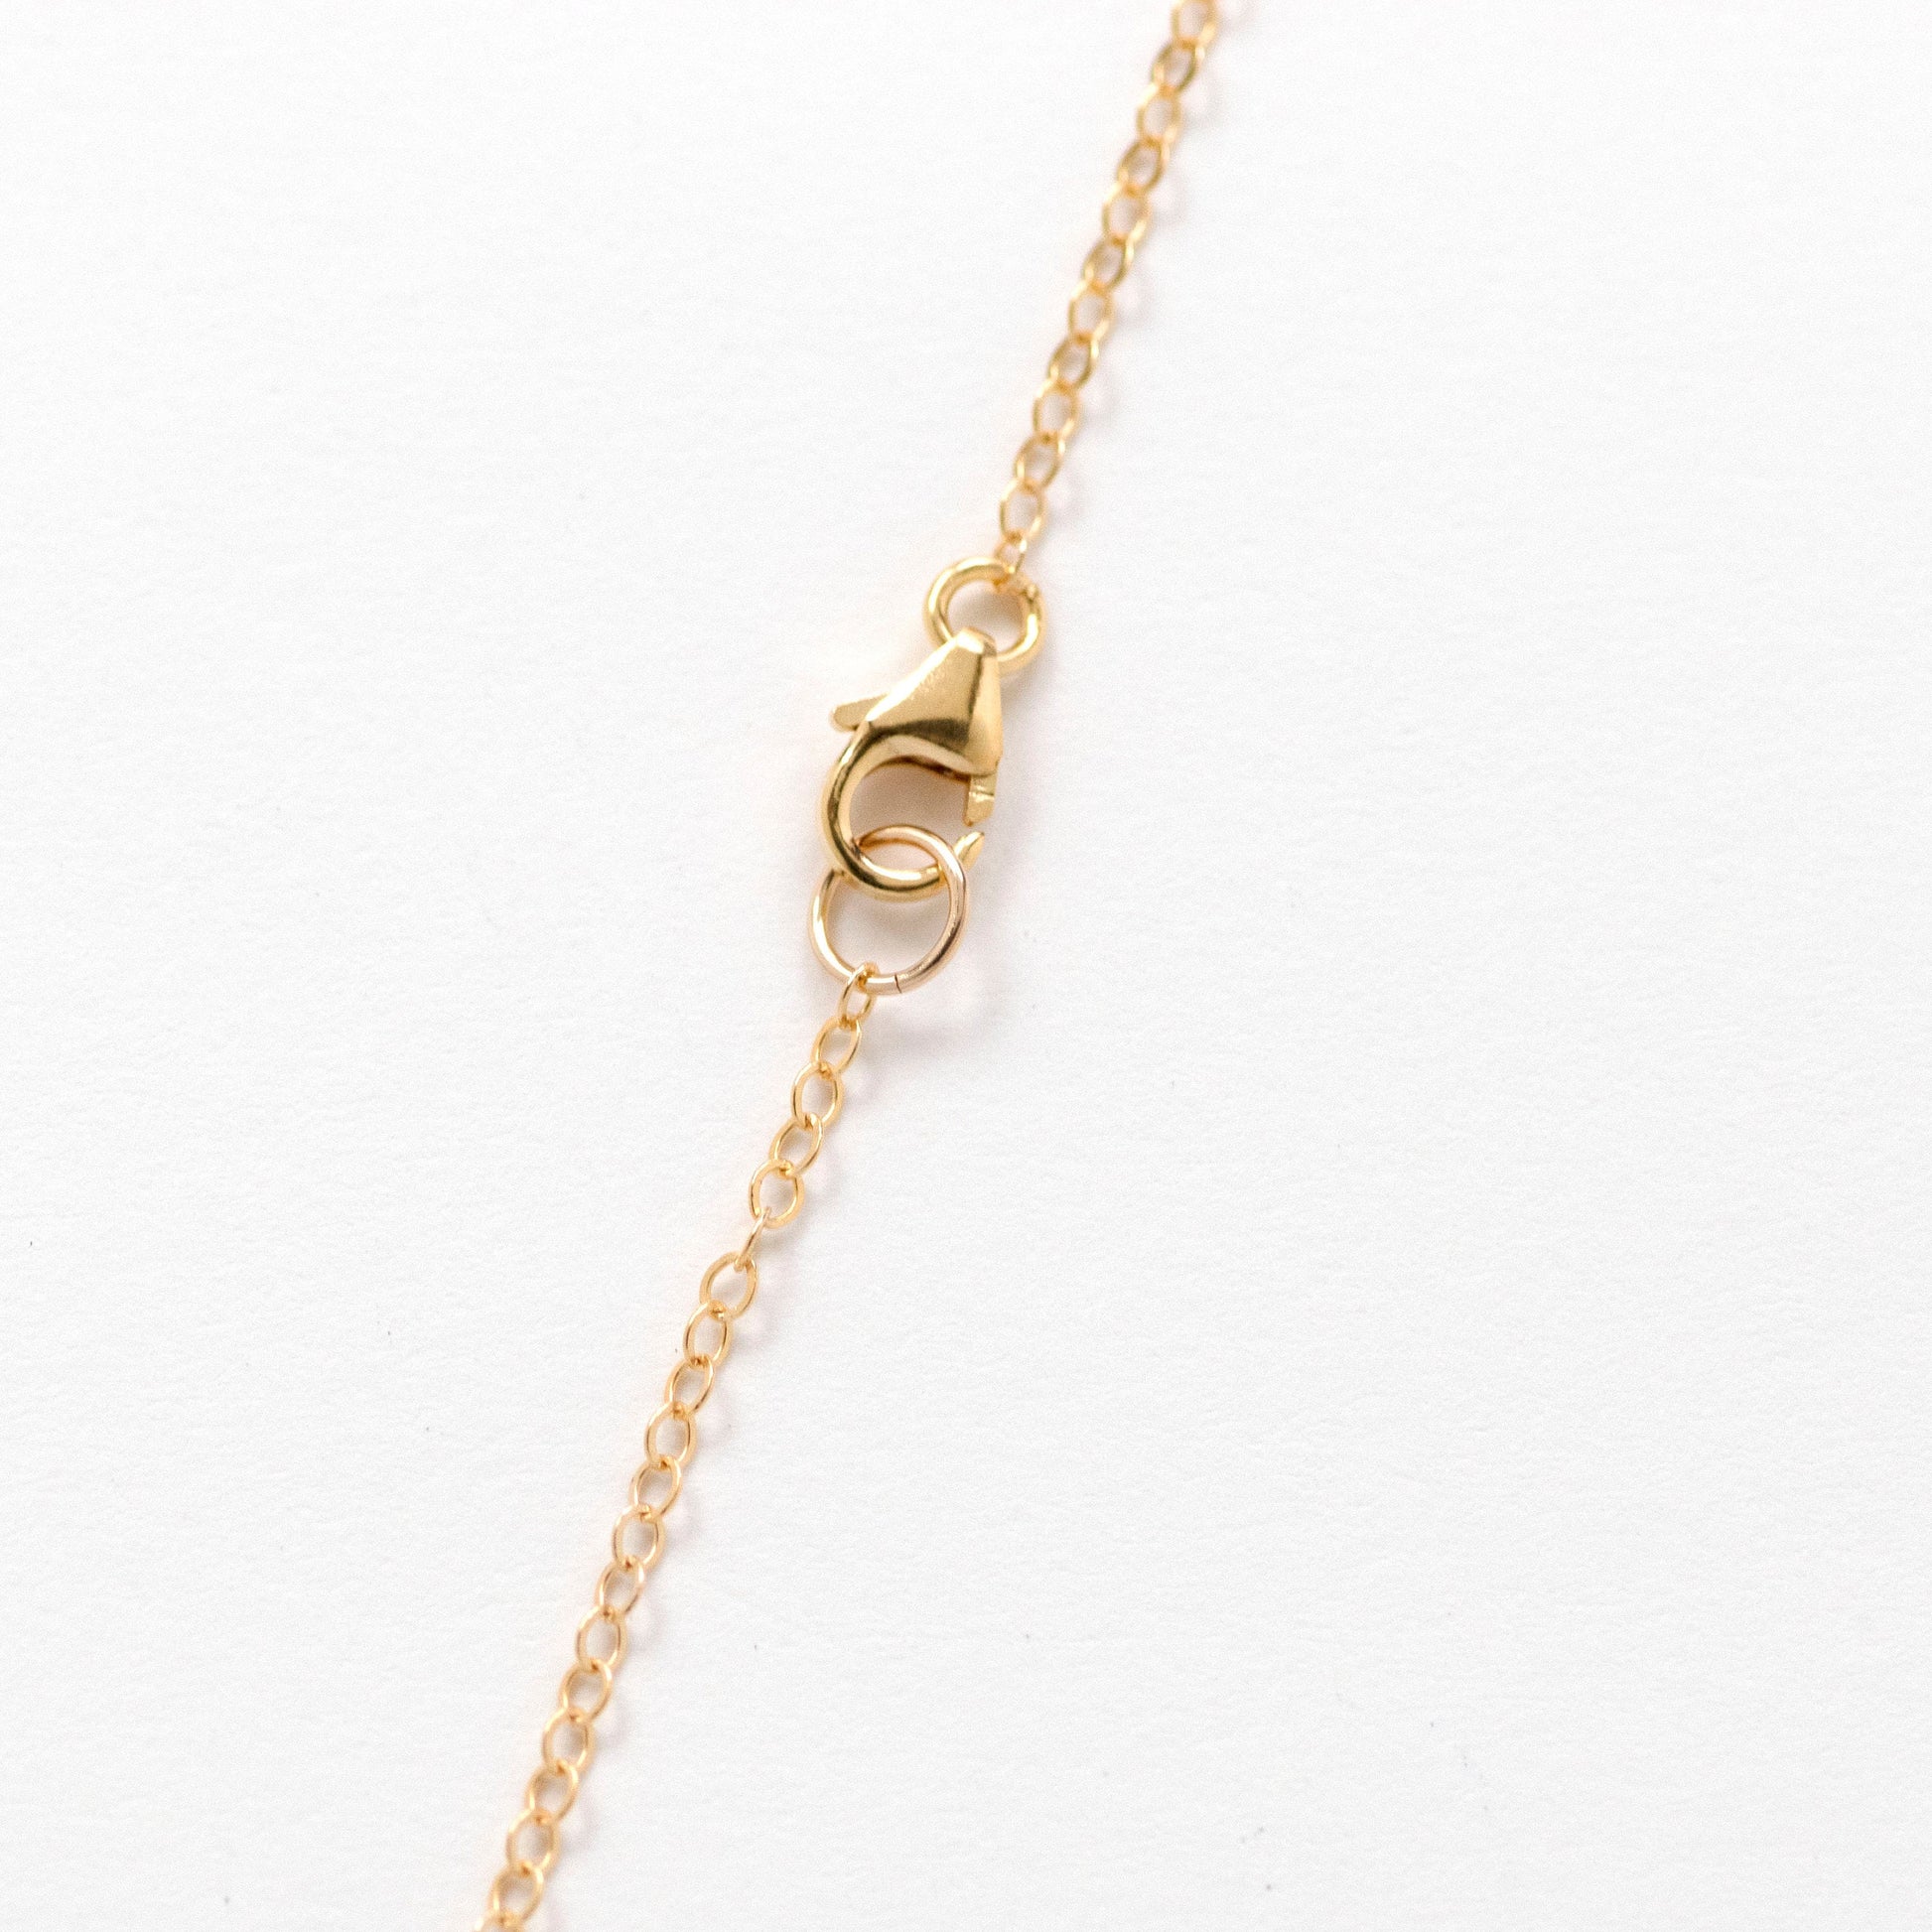 14k gold filled chain with lobster clasp